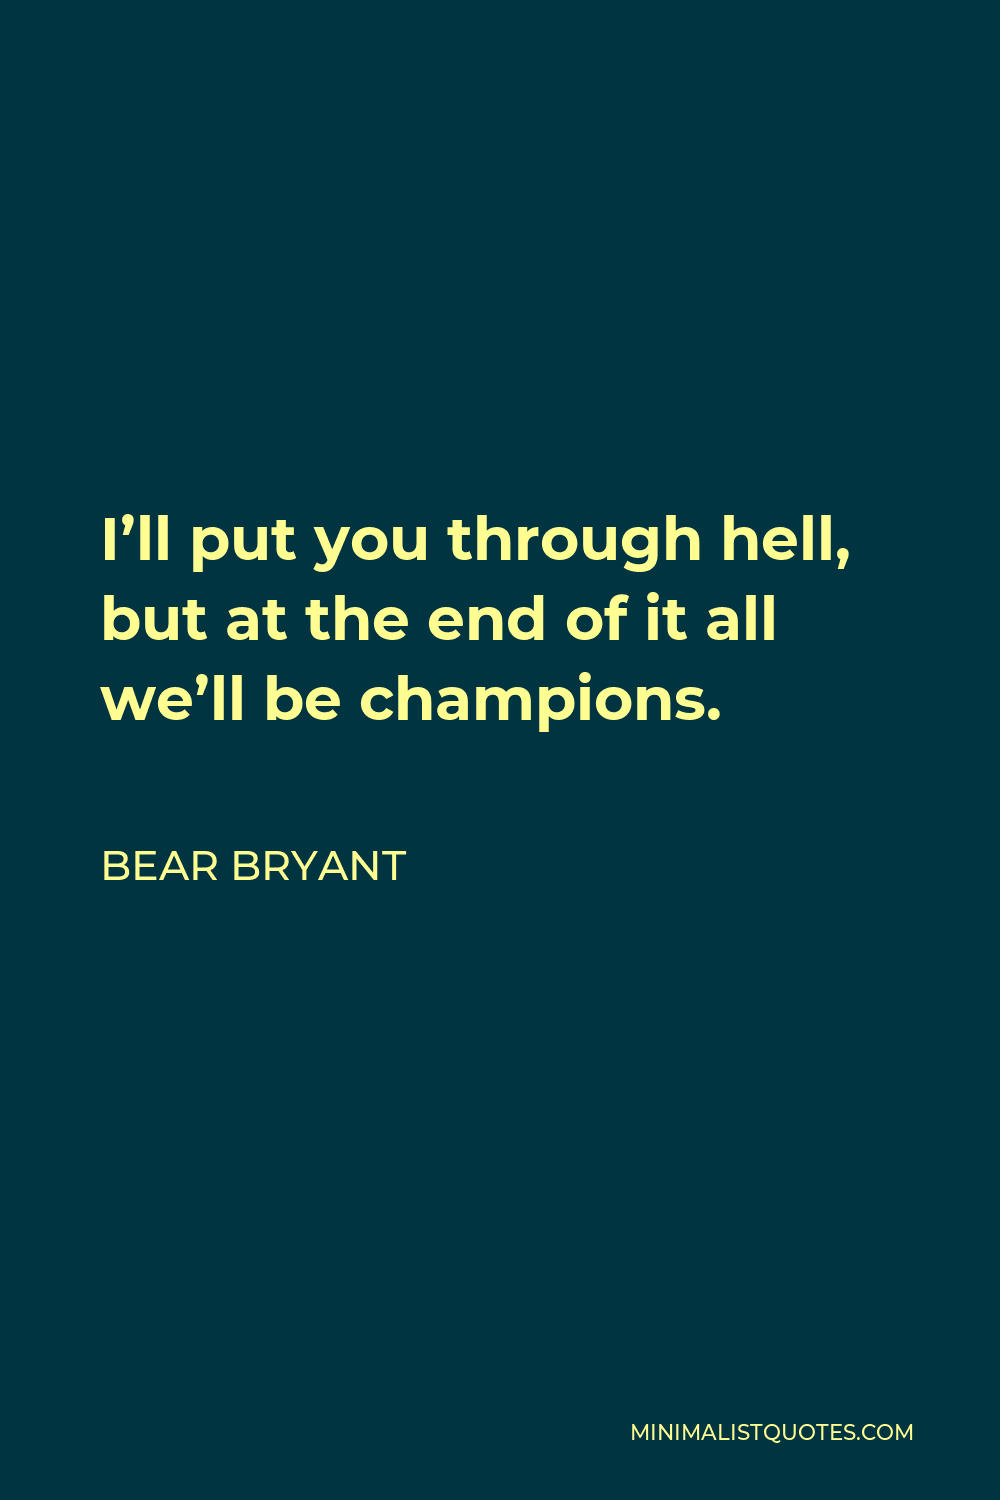 Bear Bryant Quote - I’ll put you through hell, but at the end of it all we’ll be champions.